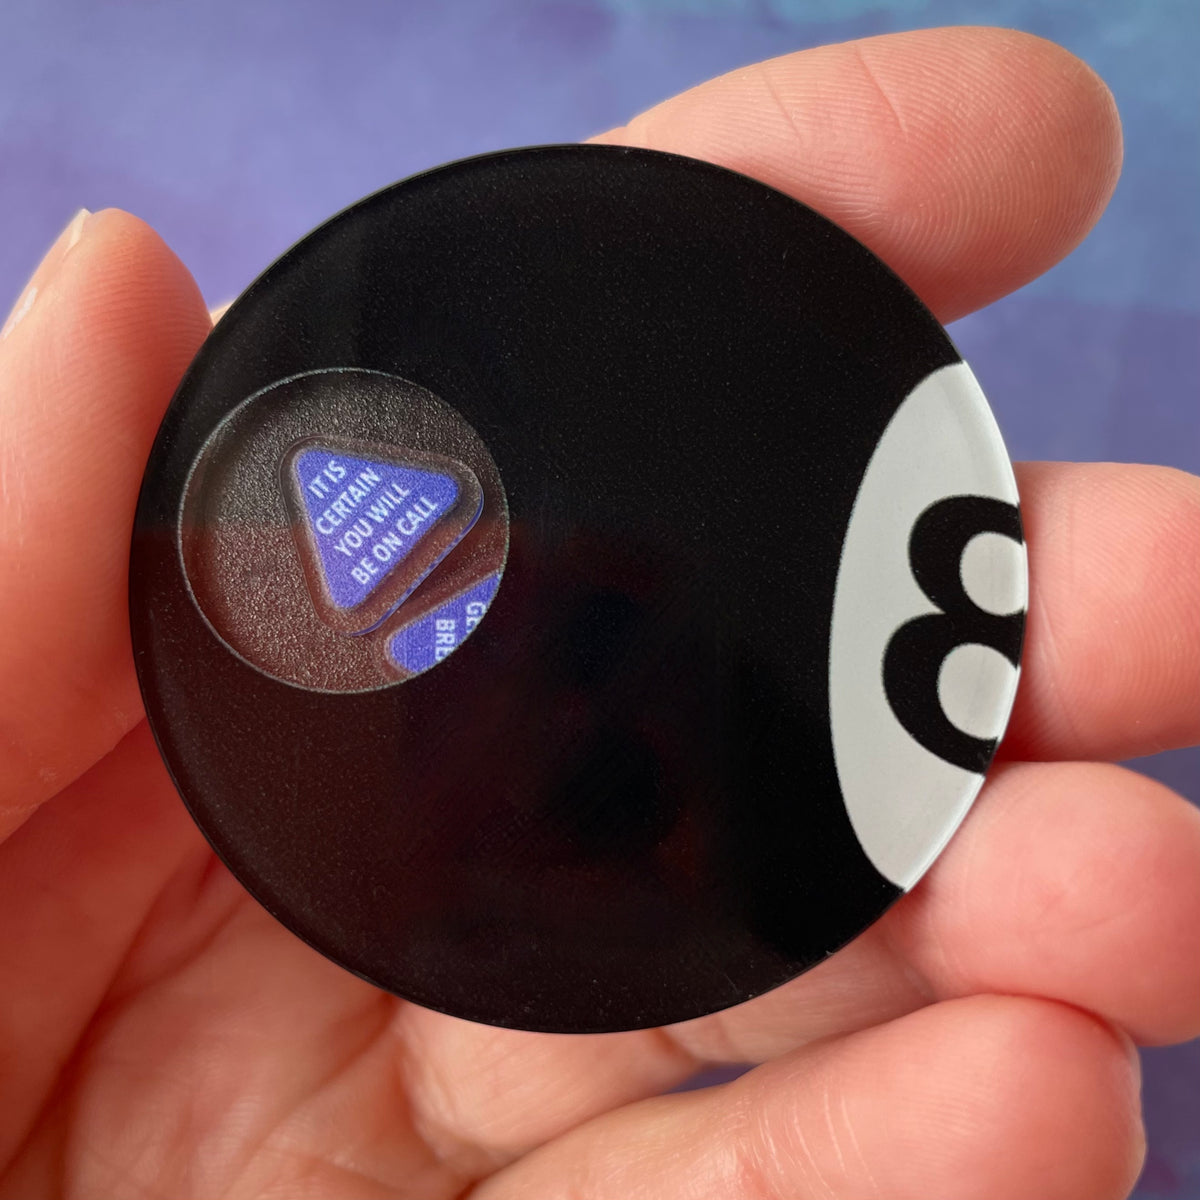 Unmagic Eight Ball - Shaker Swappable Badge Reel Design TOP